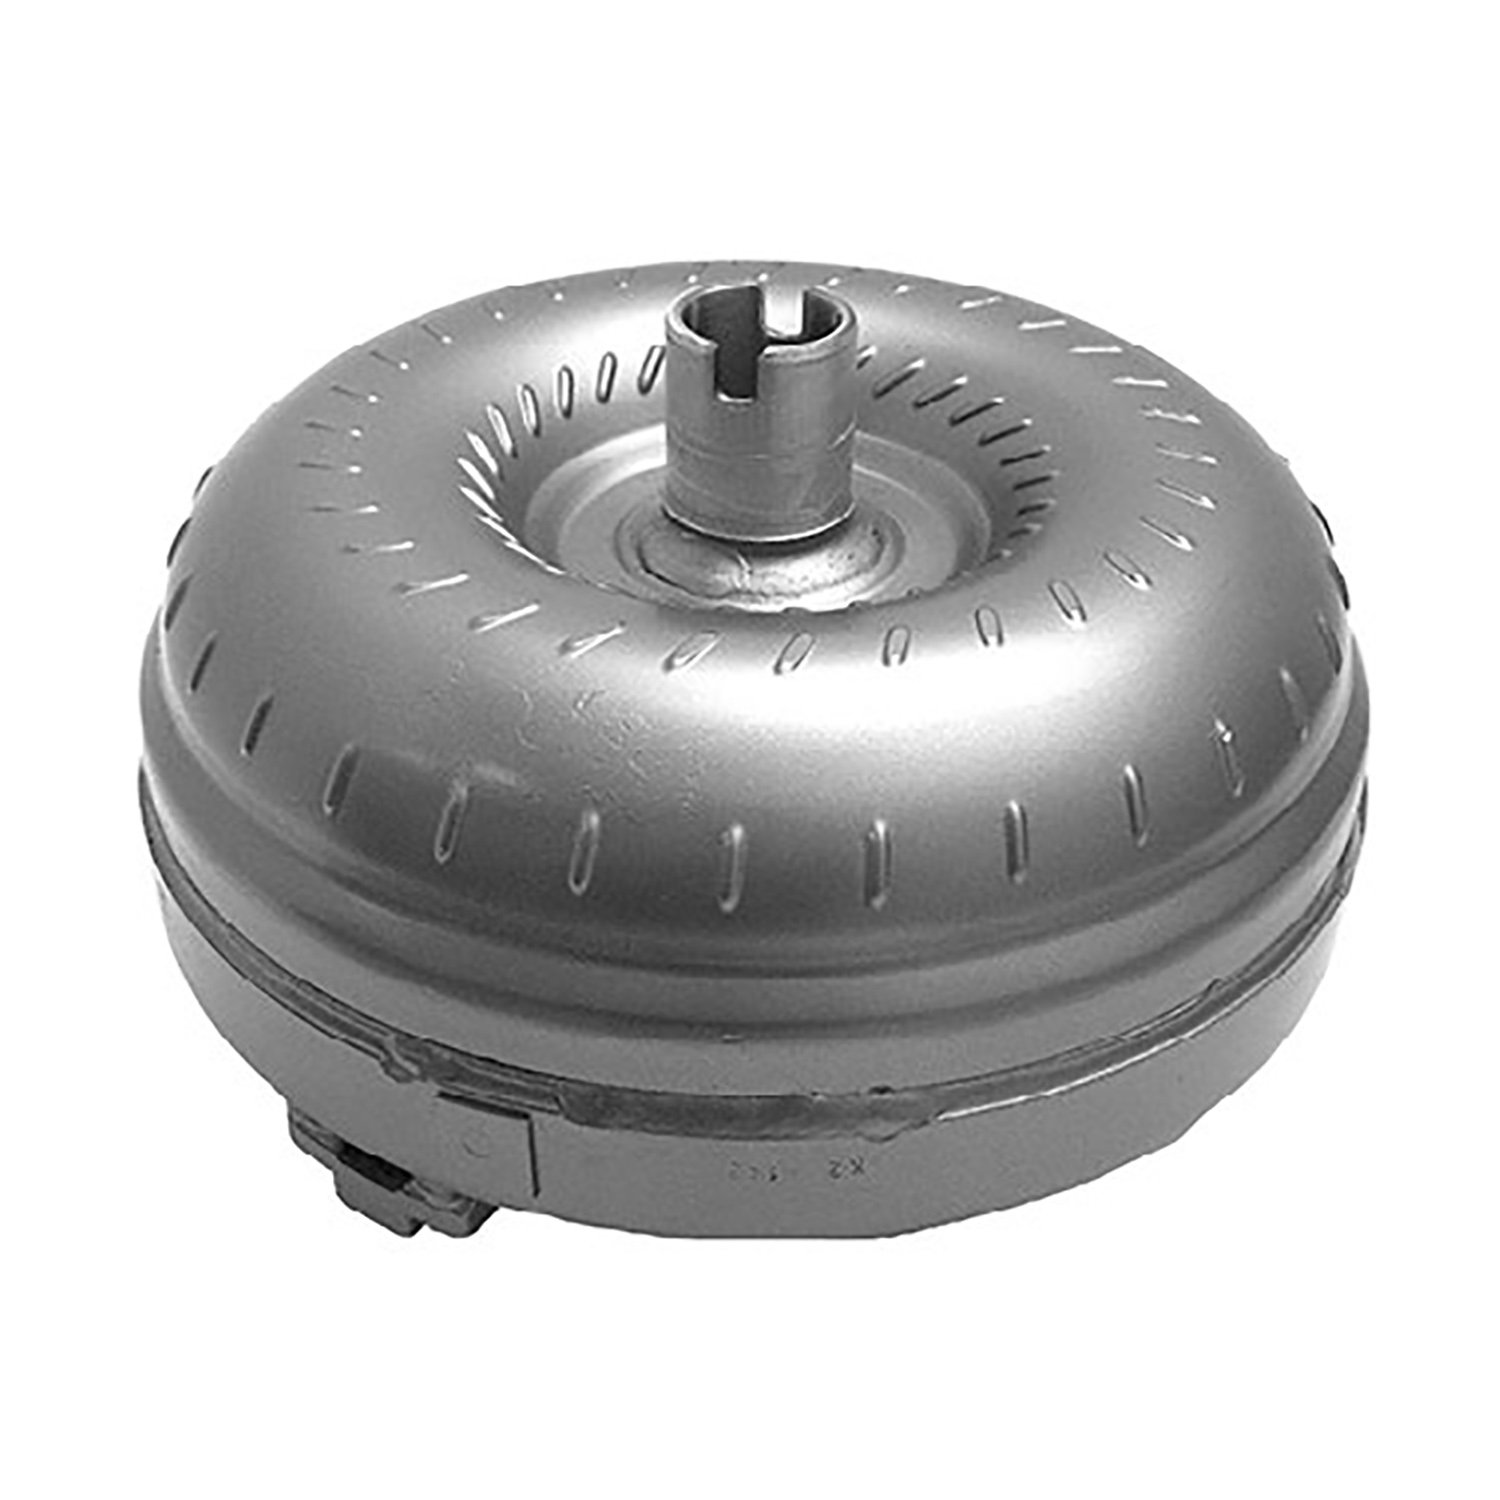 Remanufactured Automatic Transmission Torque Converter for GM 4.2 4L60E 02-08 XHS